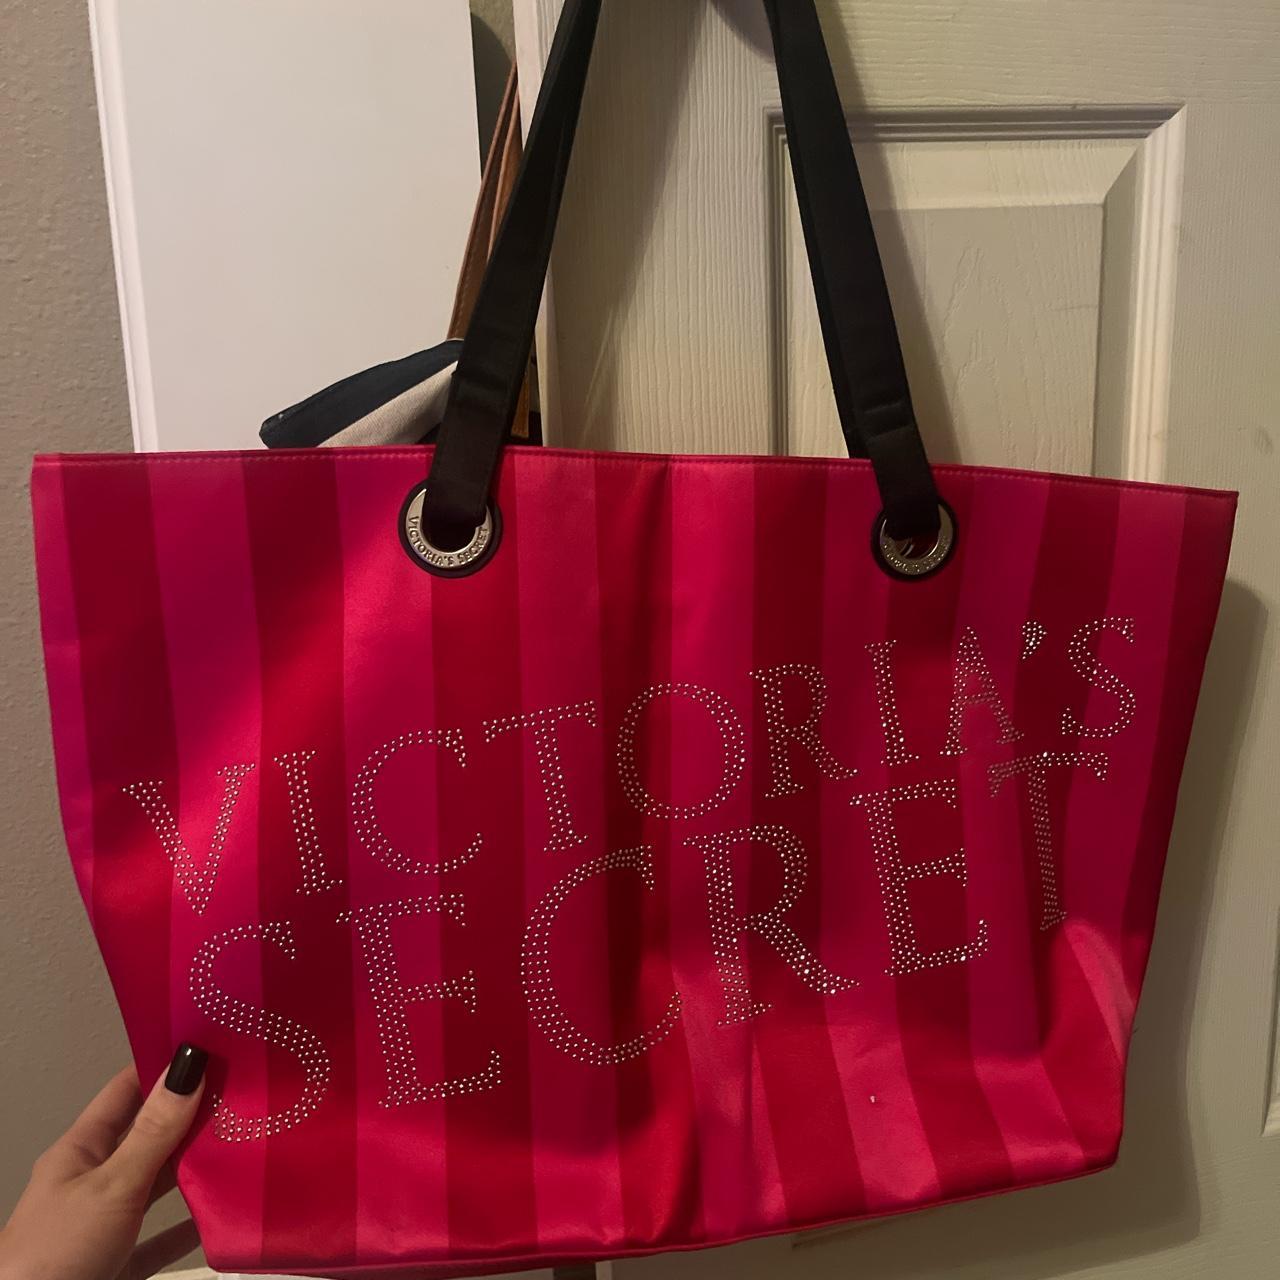 Victoria’s secret Tote Bag only used twice!